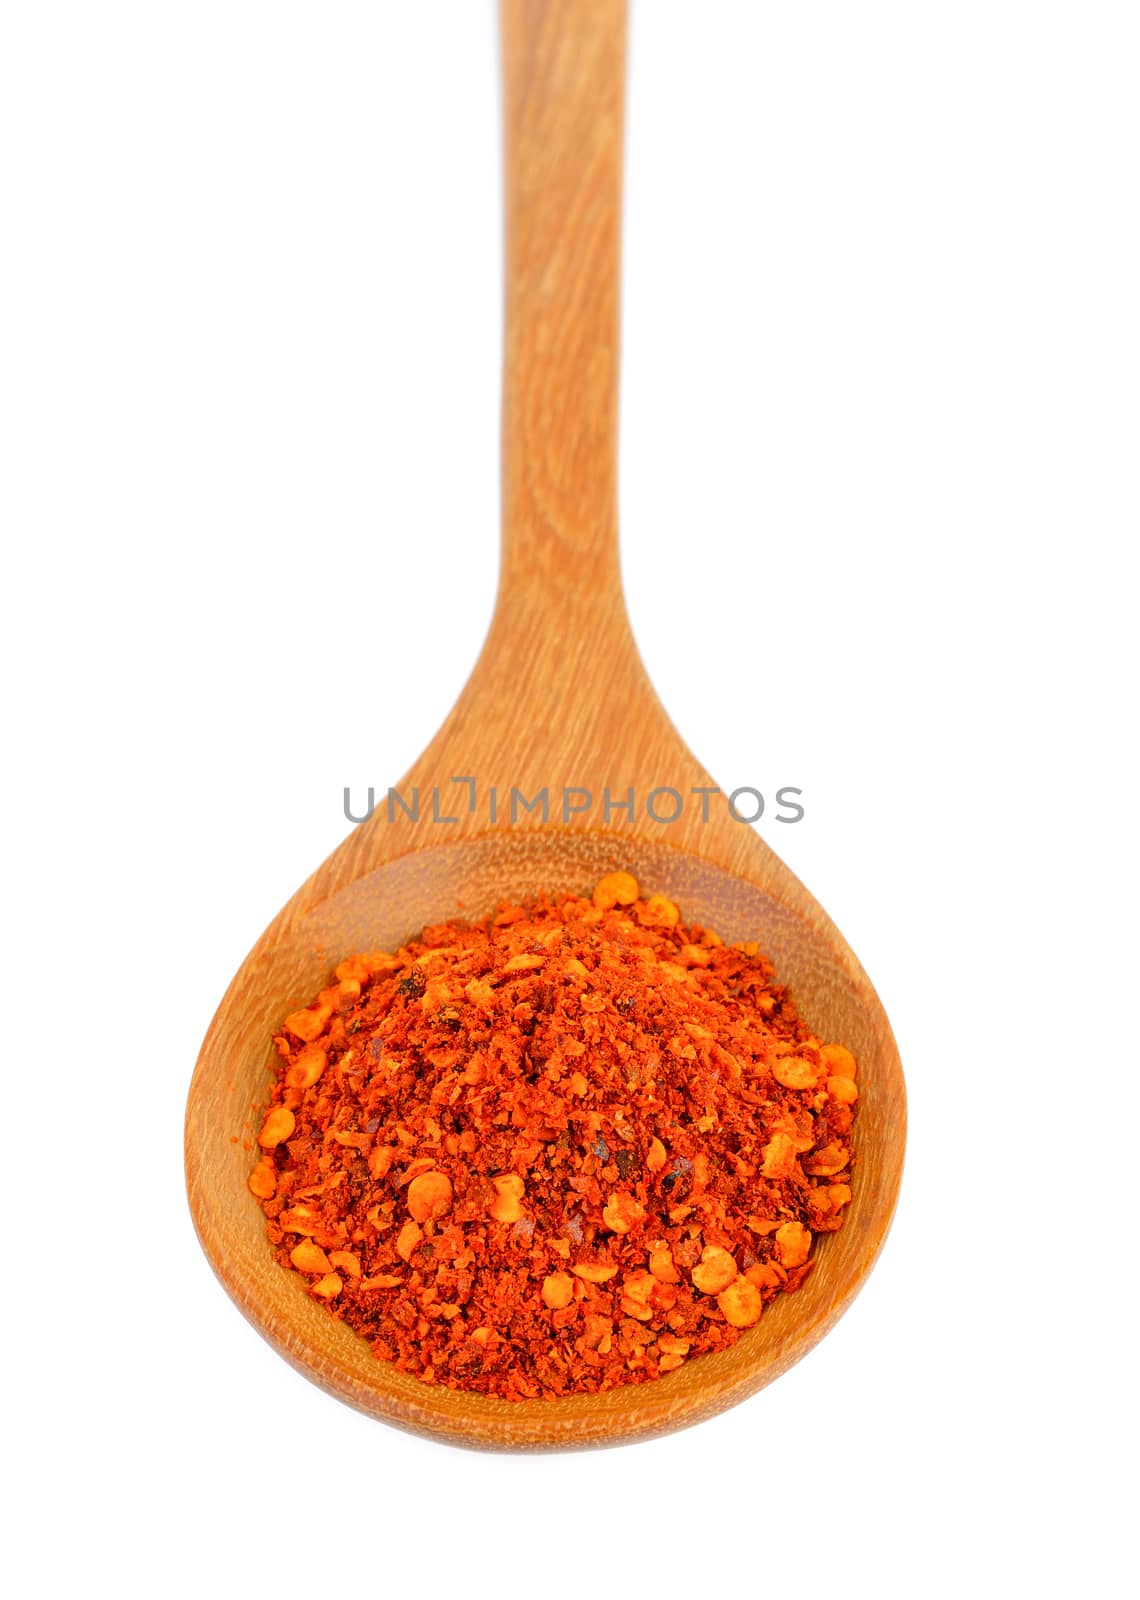 Cayenne pepper in wood spoon on white background by sommai